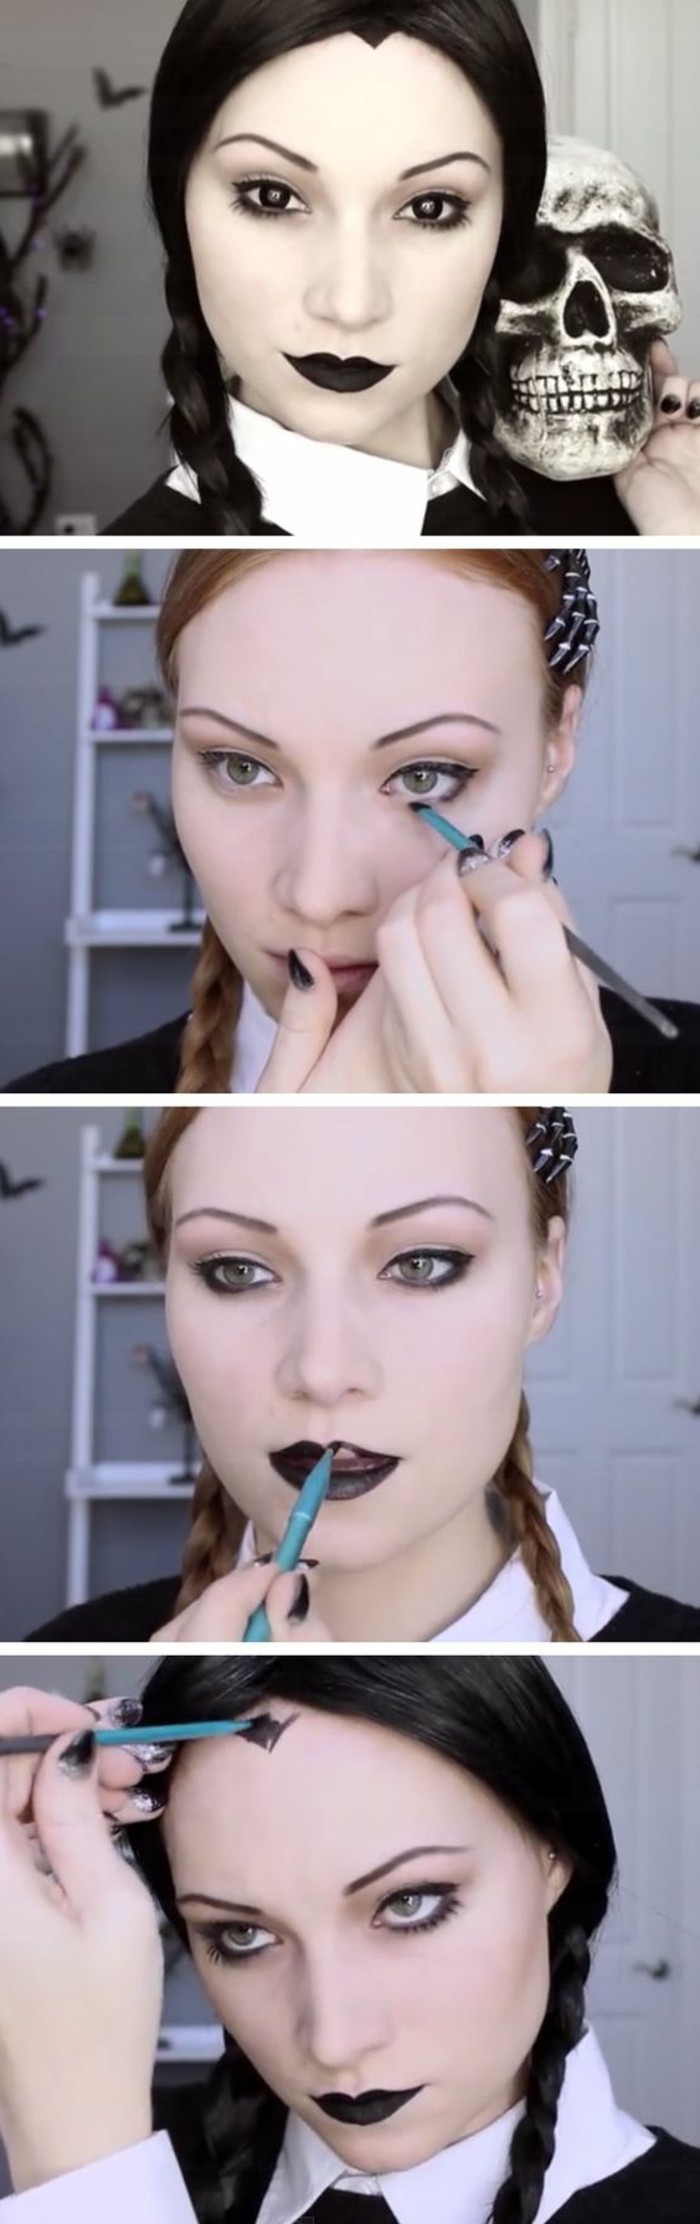 wednesday-addams-comment-faire-le-look-idee-diy-magnifique-maquillage-halloween